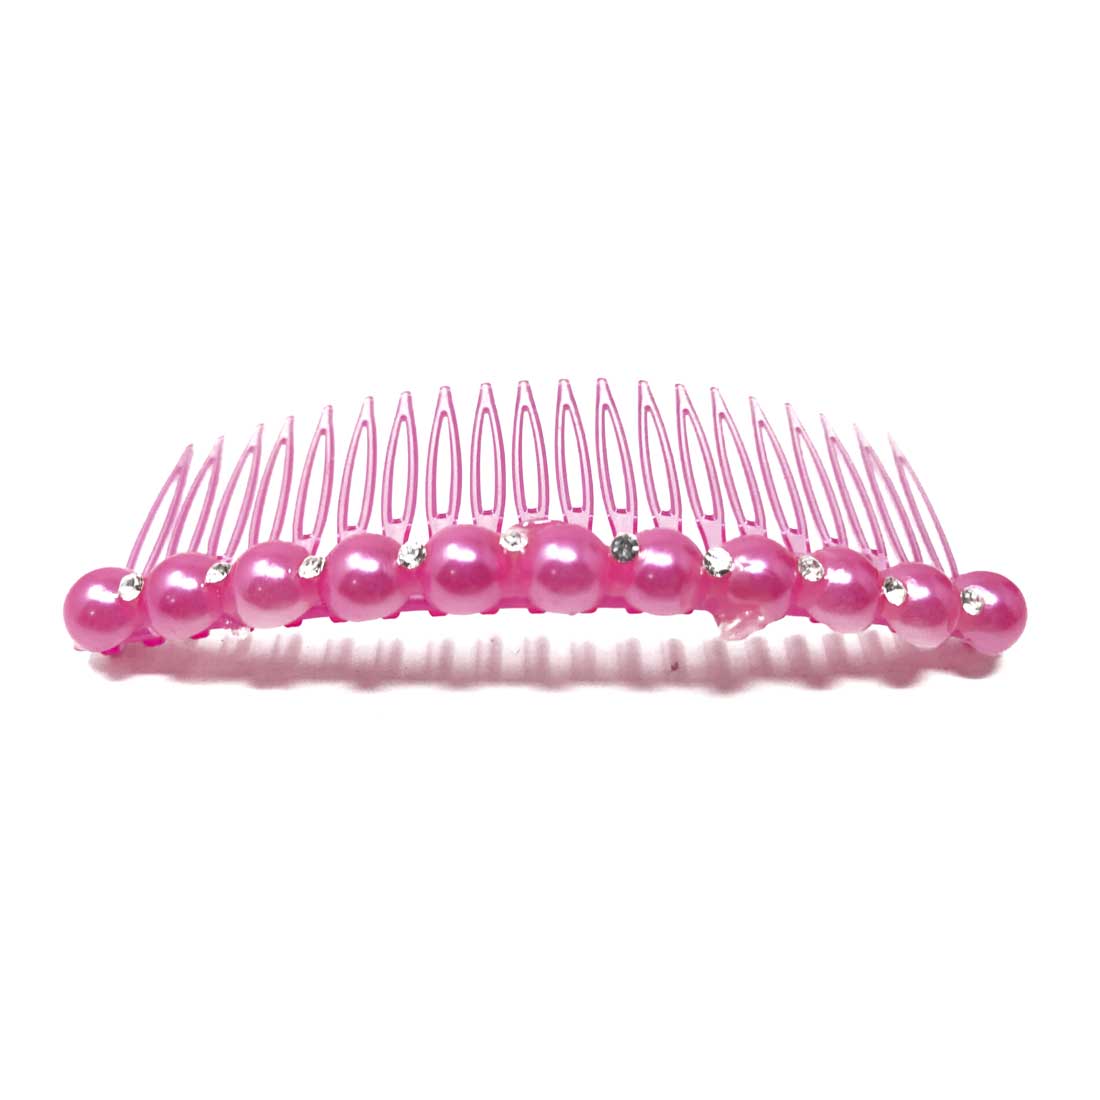 Anokhi Ada Hair Comb Clip for Women and Girls, Pink (07-01)